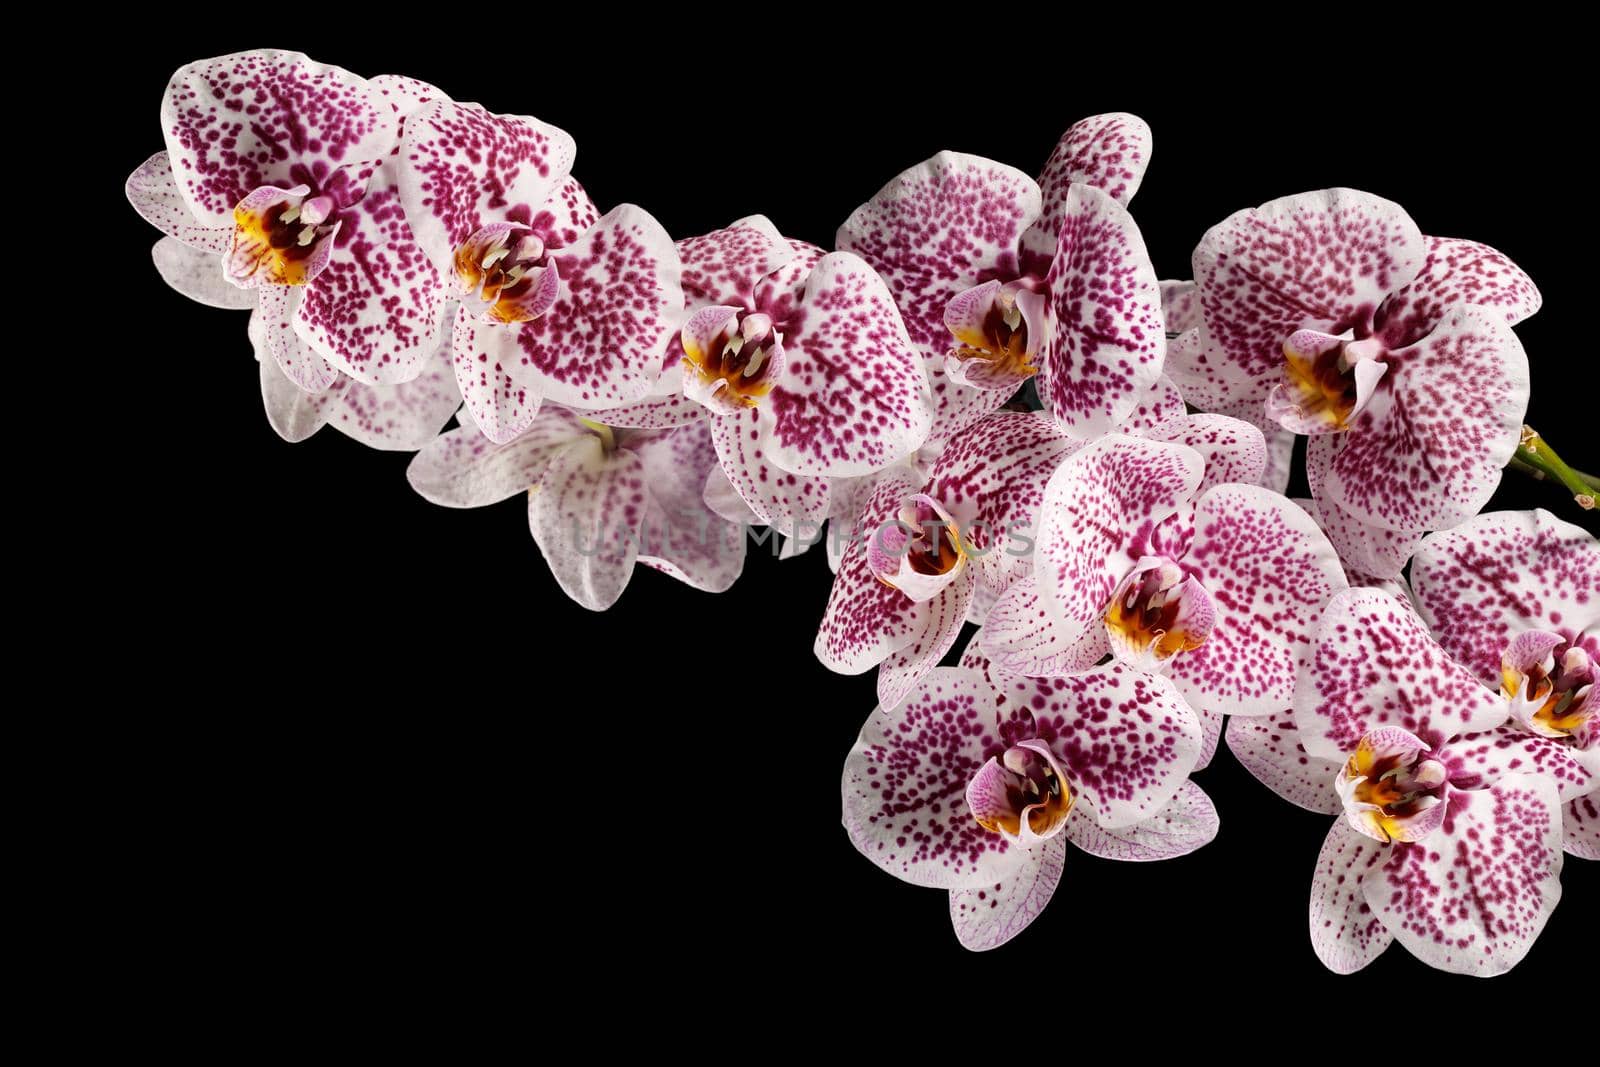 Beautiful Phalaenopsis orchid flowers, isolated on black background by Lincikas